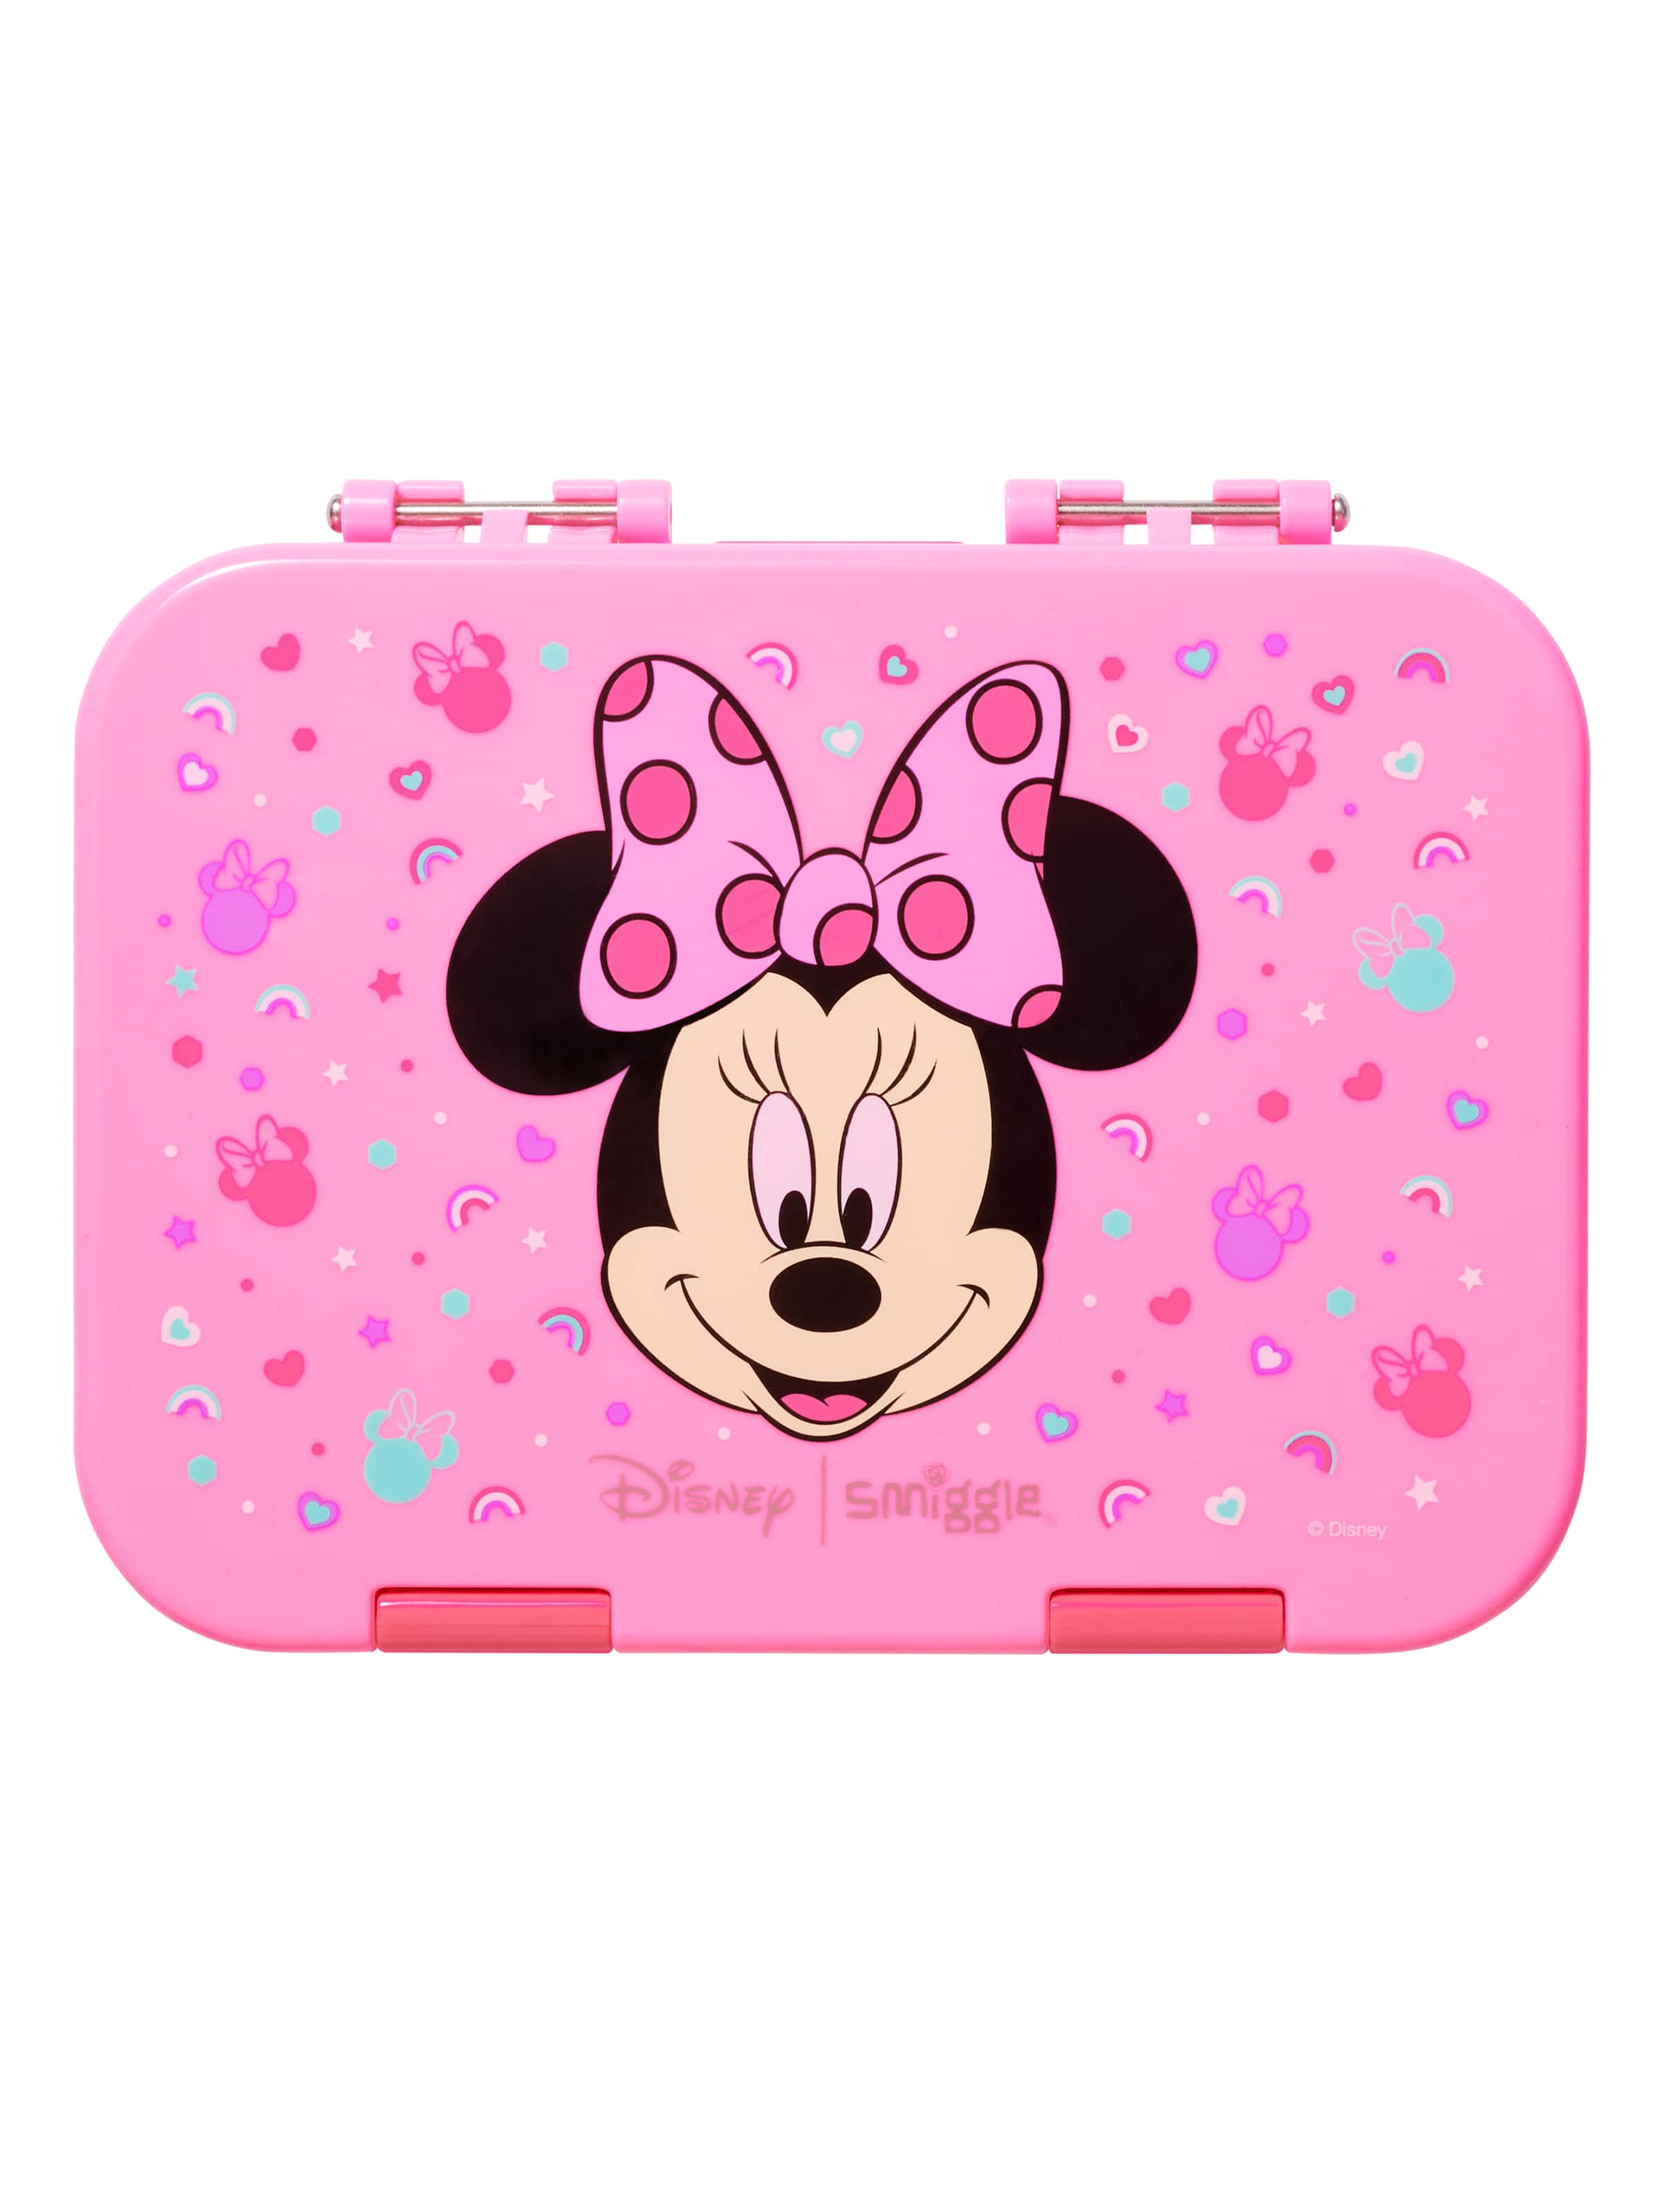 Disney Minnie Mouse Love Bows Soft Lunch Box Insulated Bag Pink Stripes  Lunchbox